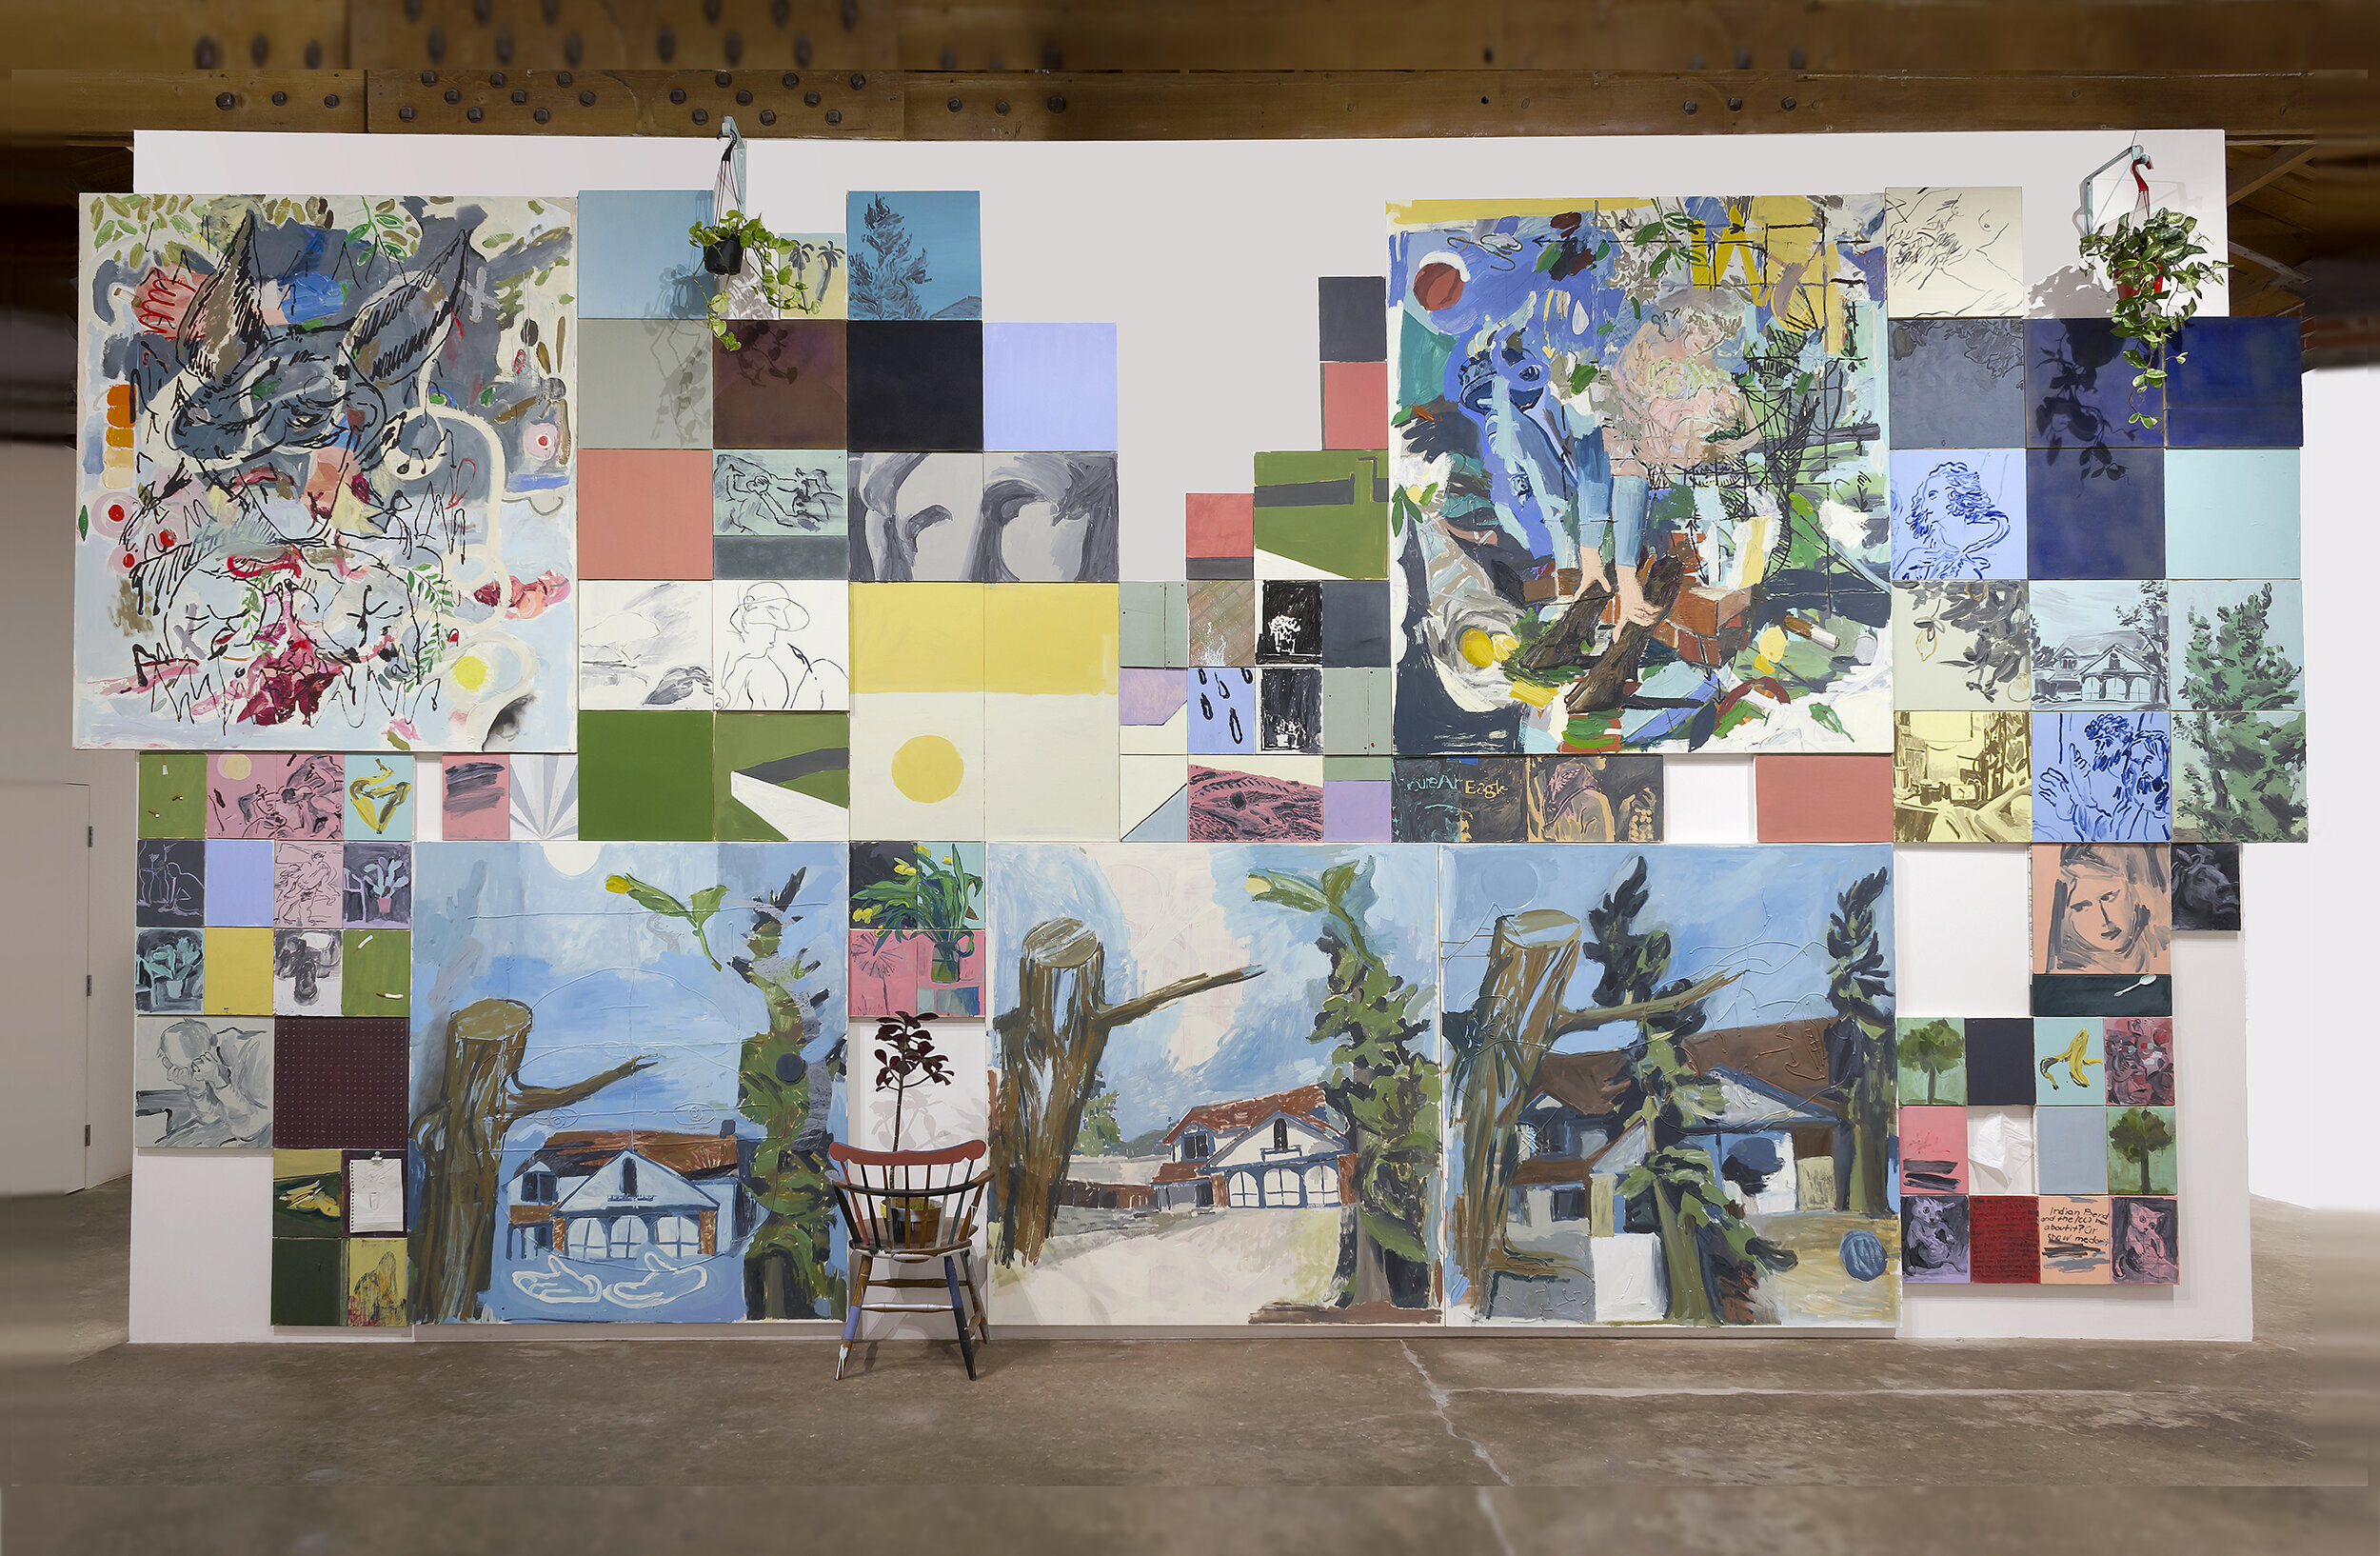  The installation measured 24 feet wide by 14 feet tall and was comprised of 96 different canvases, 15 autonomous works, and three readymade objects. 